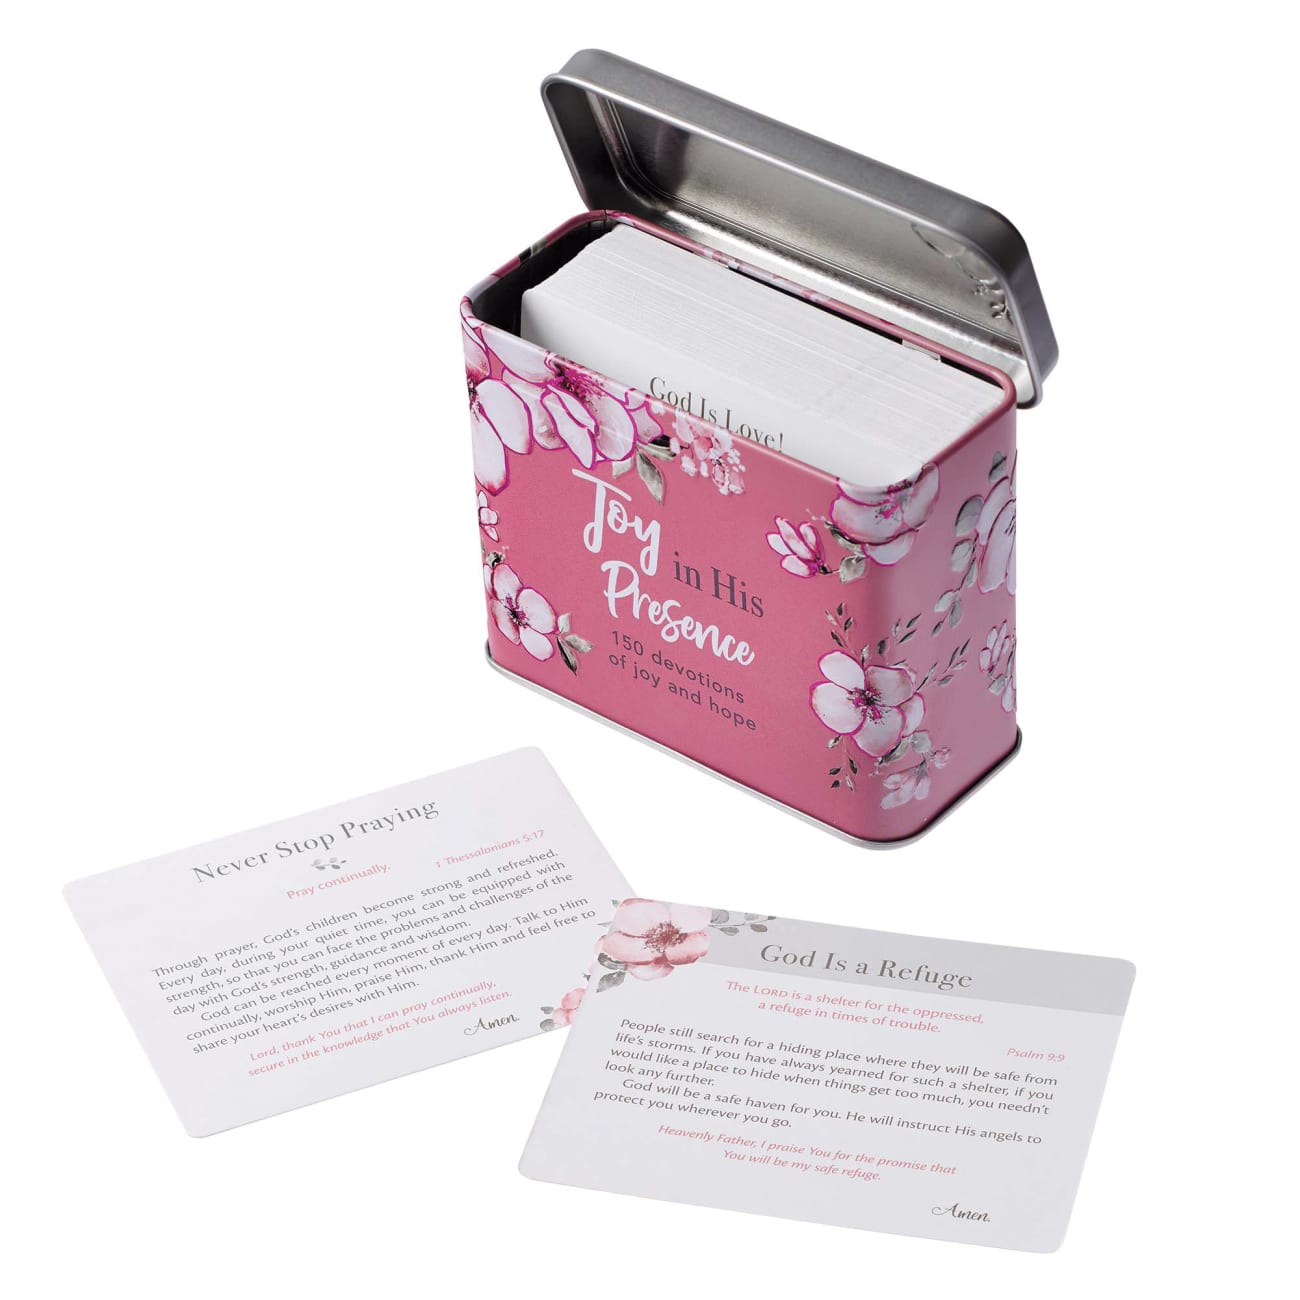 Devotional Cards in a Tin: Joy in His Presence, For Women, 75 Double Sided Cards Box